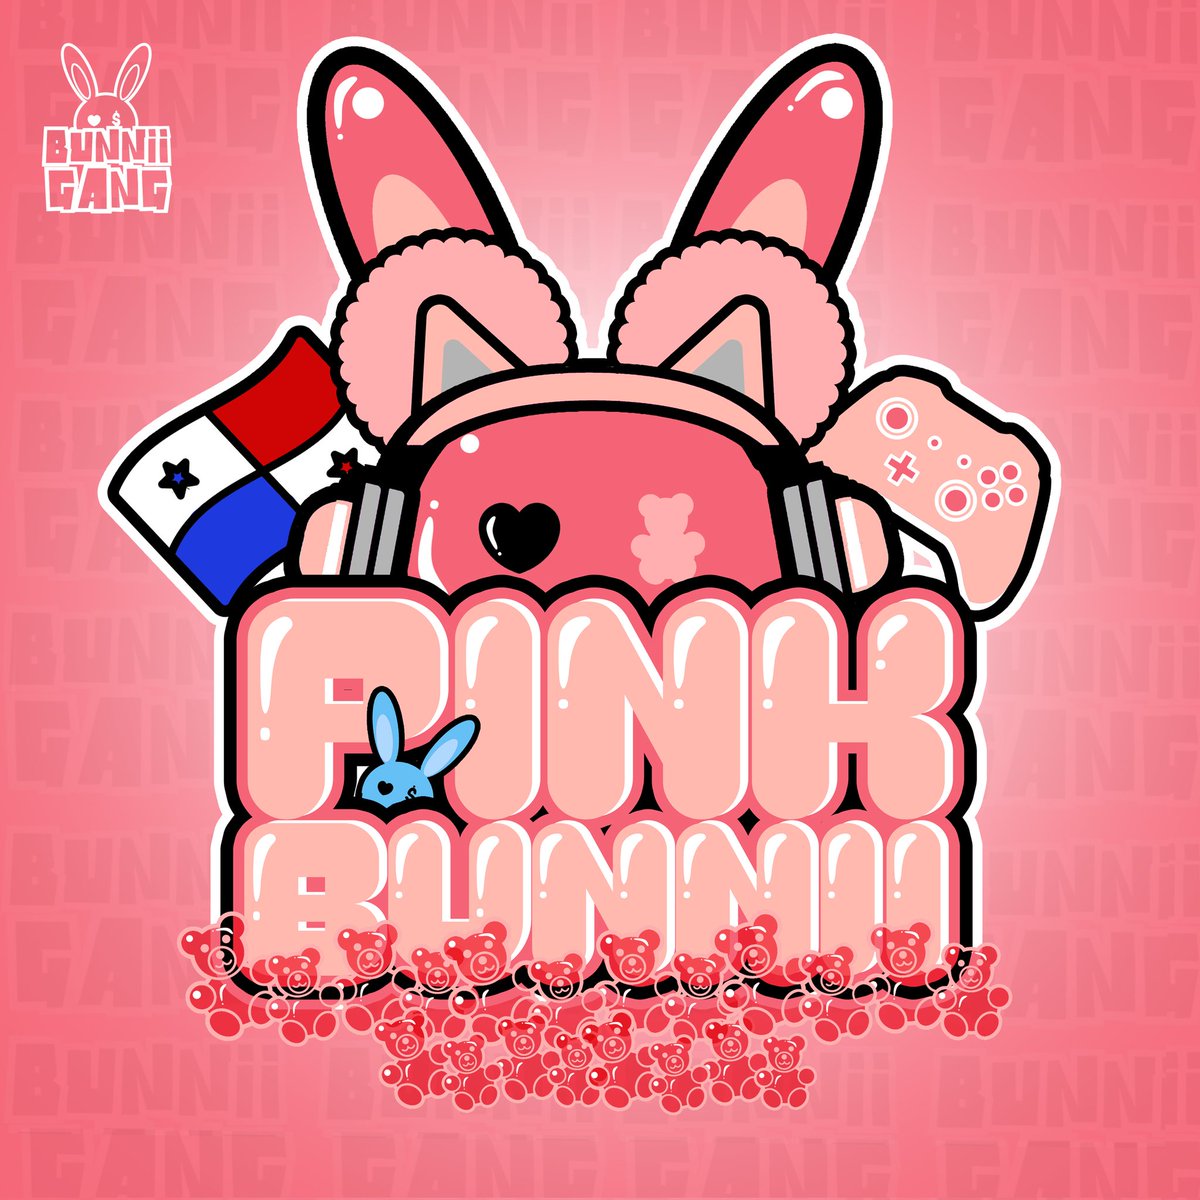 WE ARE EXCITED TO ANNOUNCE OUR NEWEST COLLABORATION W/ GAMING CONTENT CREATOR
@PinkSaibot GANG, GANG!!! THE 'PINK BUNNII' WILL BE DROPPING SOON AT BUNNIIGANG.COM #BUNNIIGANG #HOPWITUS